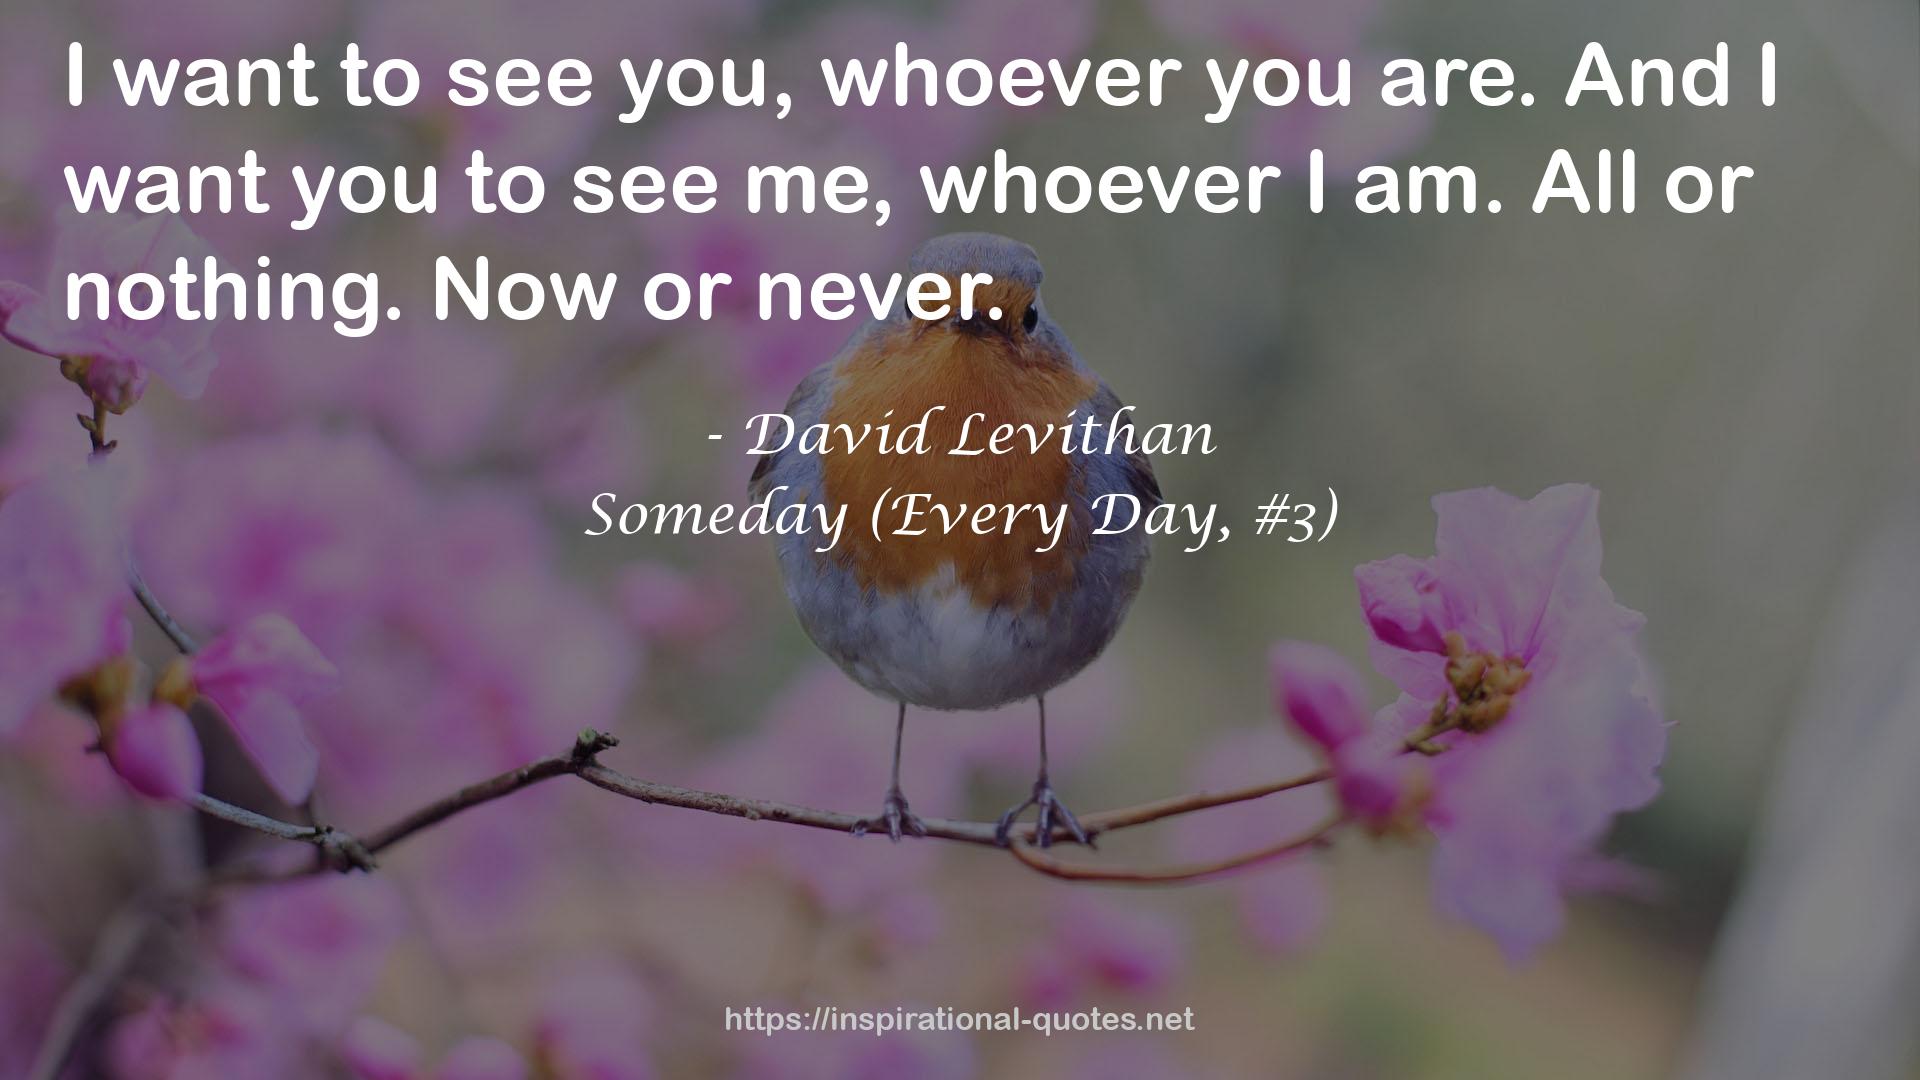 Someday (Every Day, #3) QUOTES